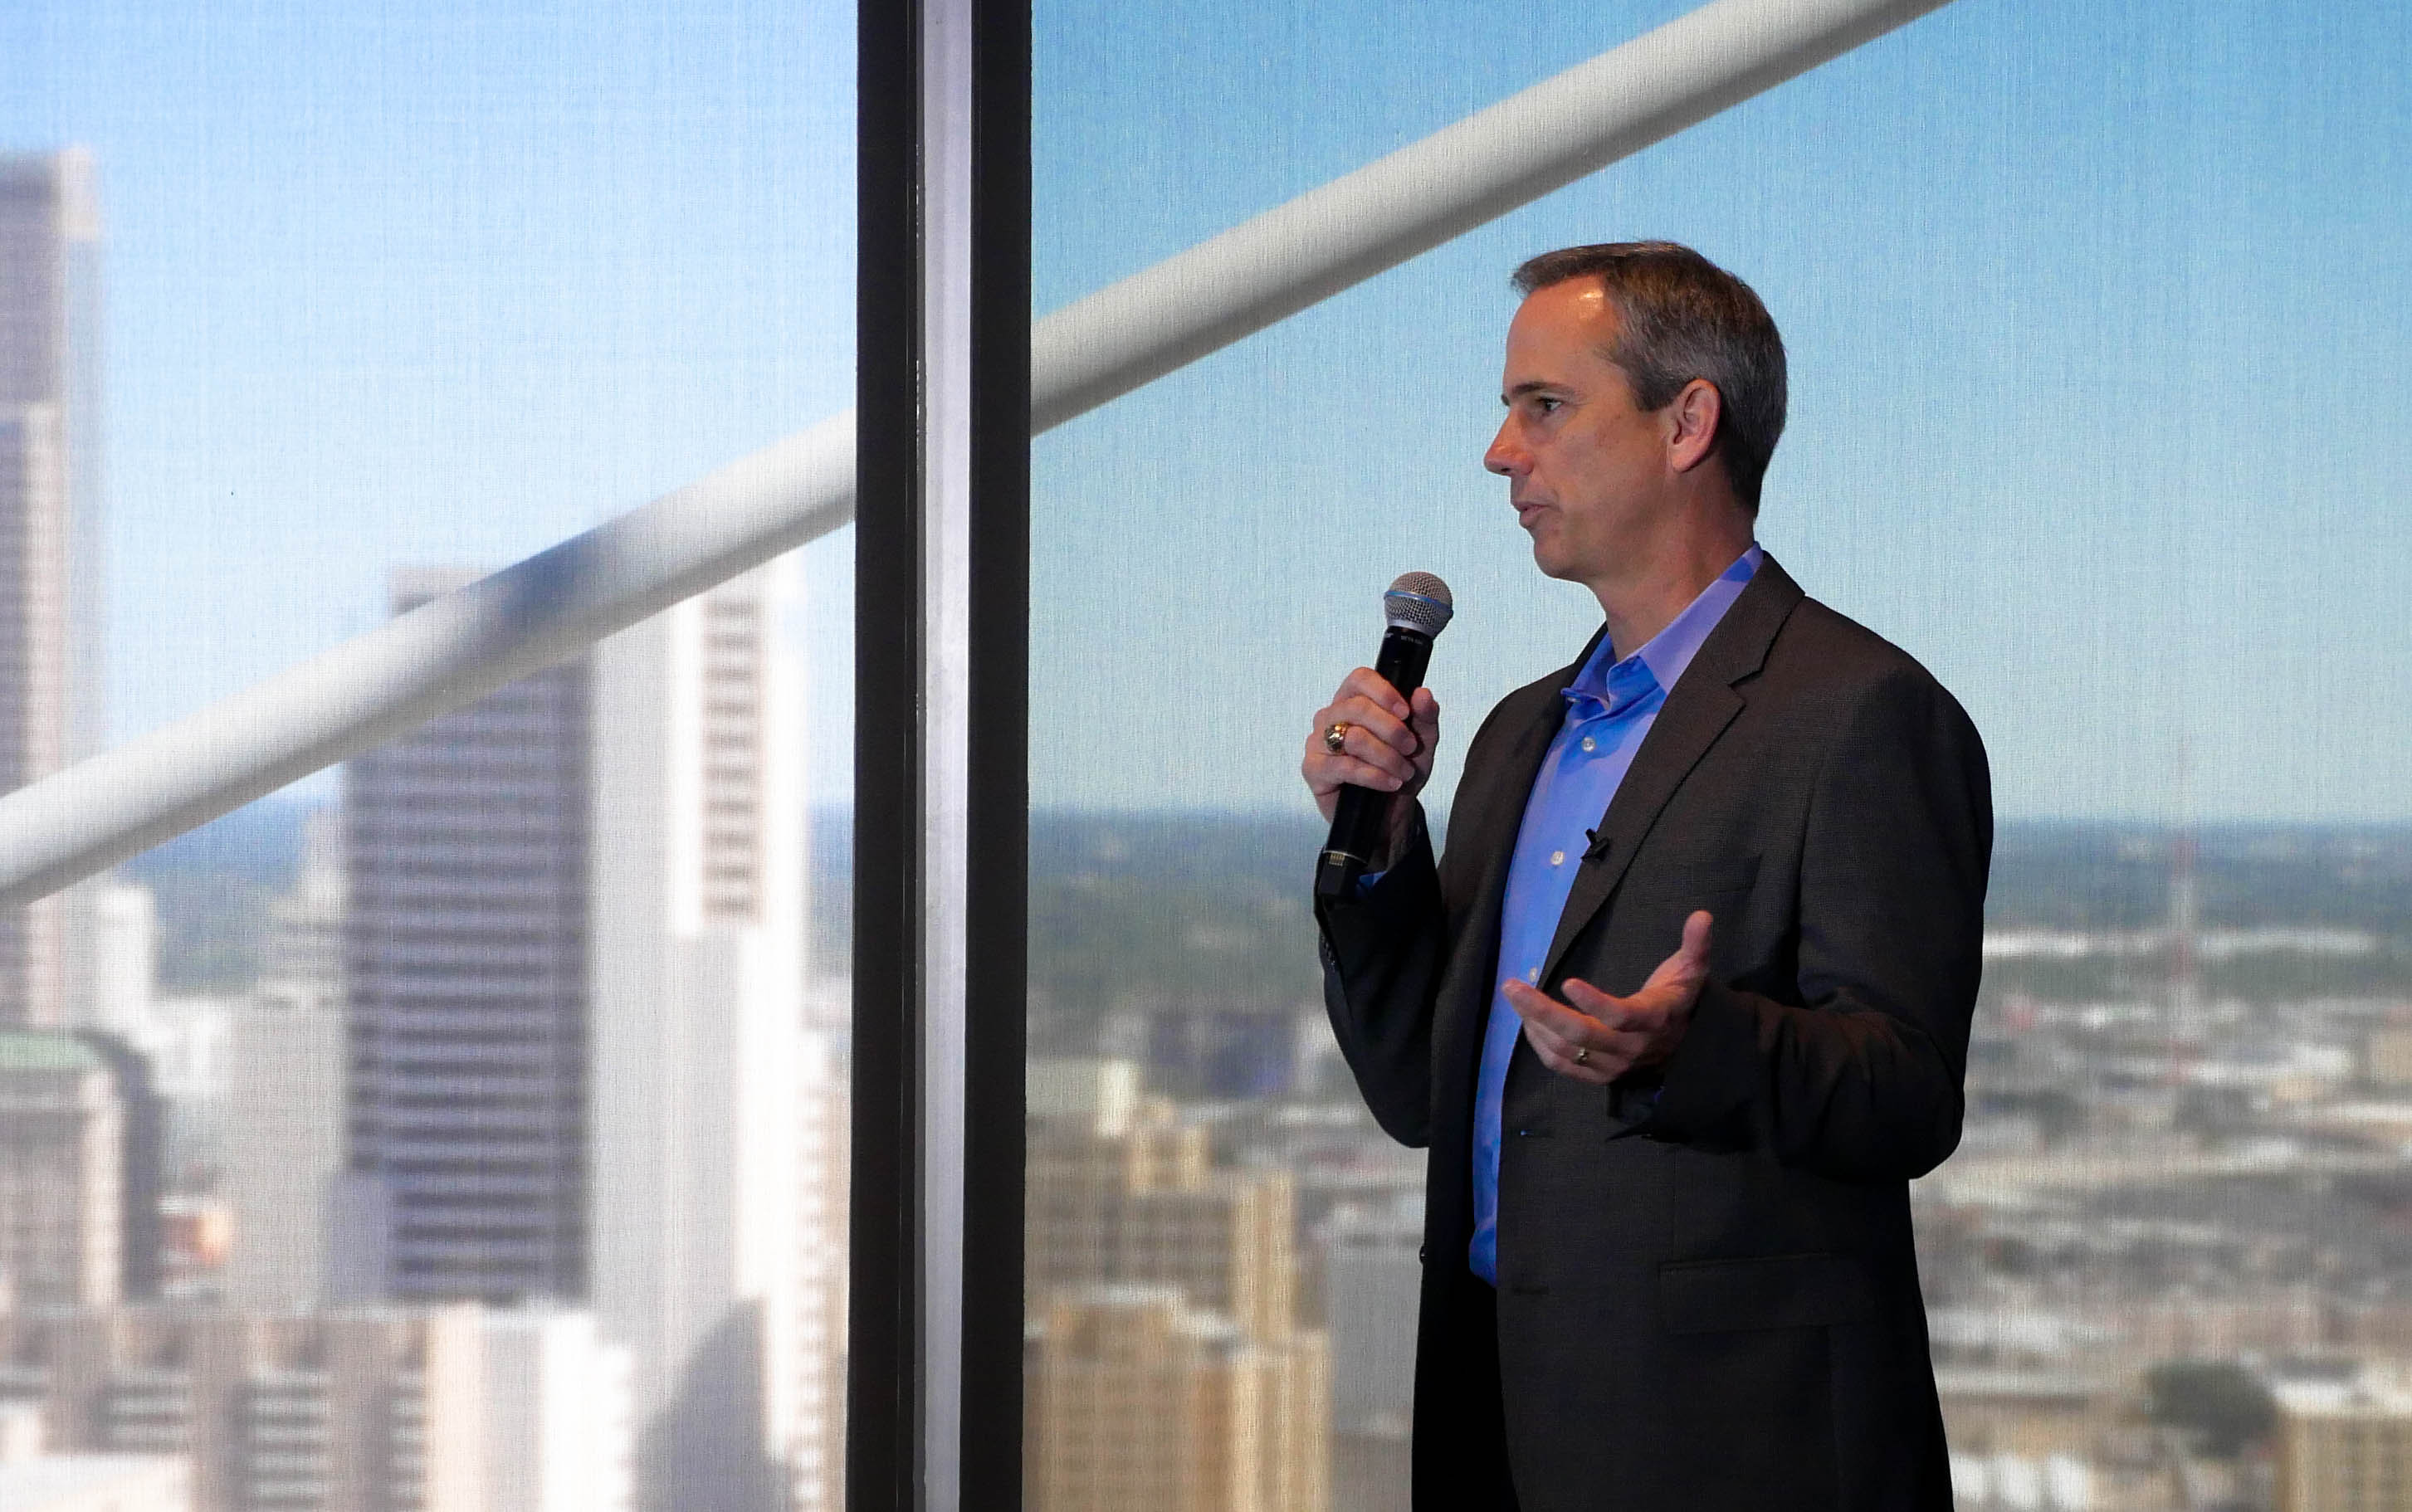 Sendero CEO Bret Farrar addresses employees at an all company off-site meeting